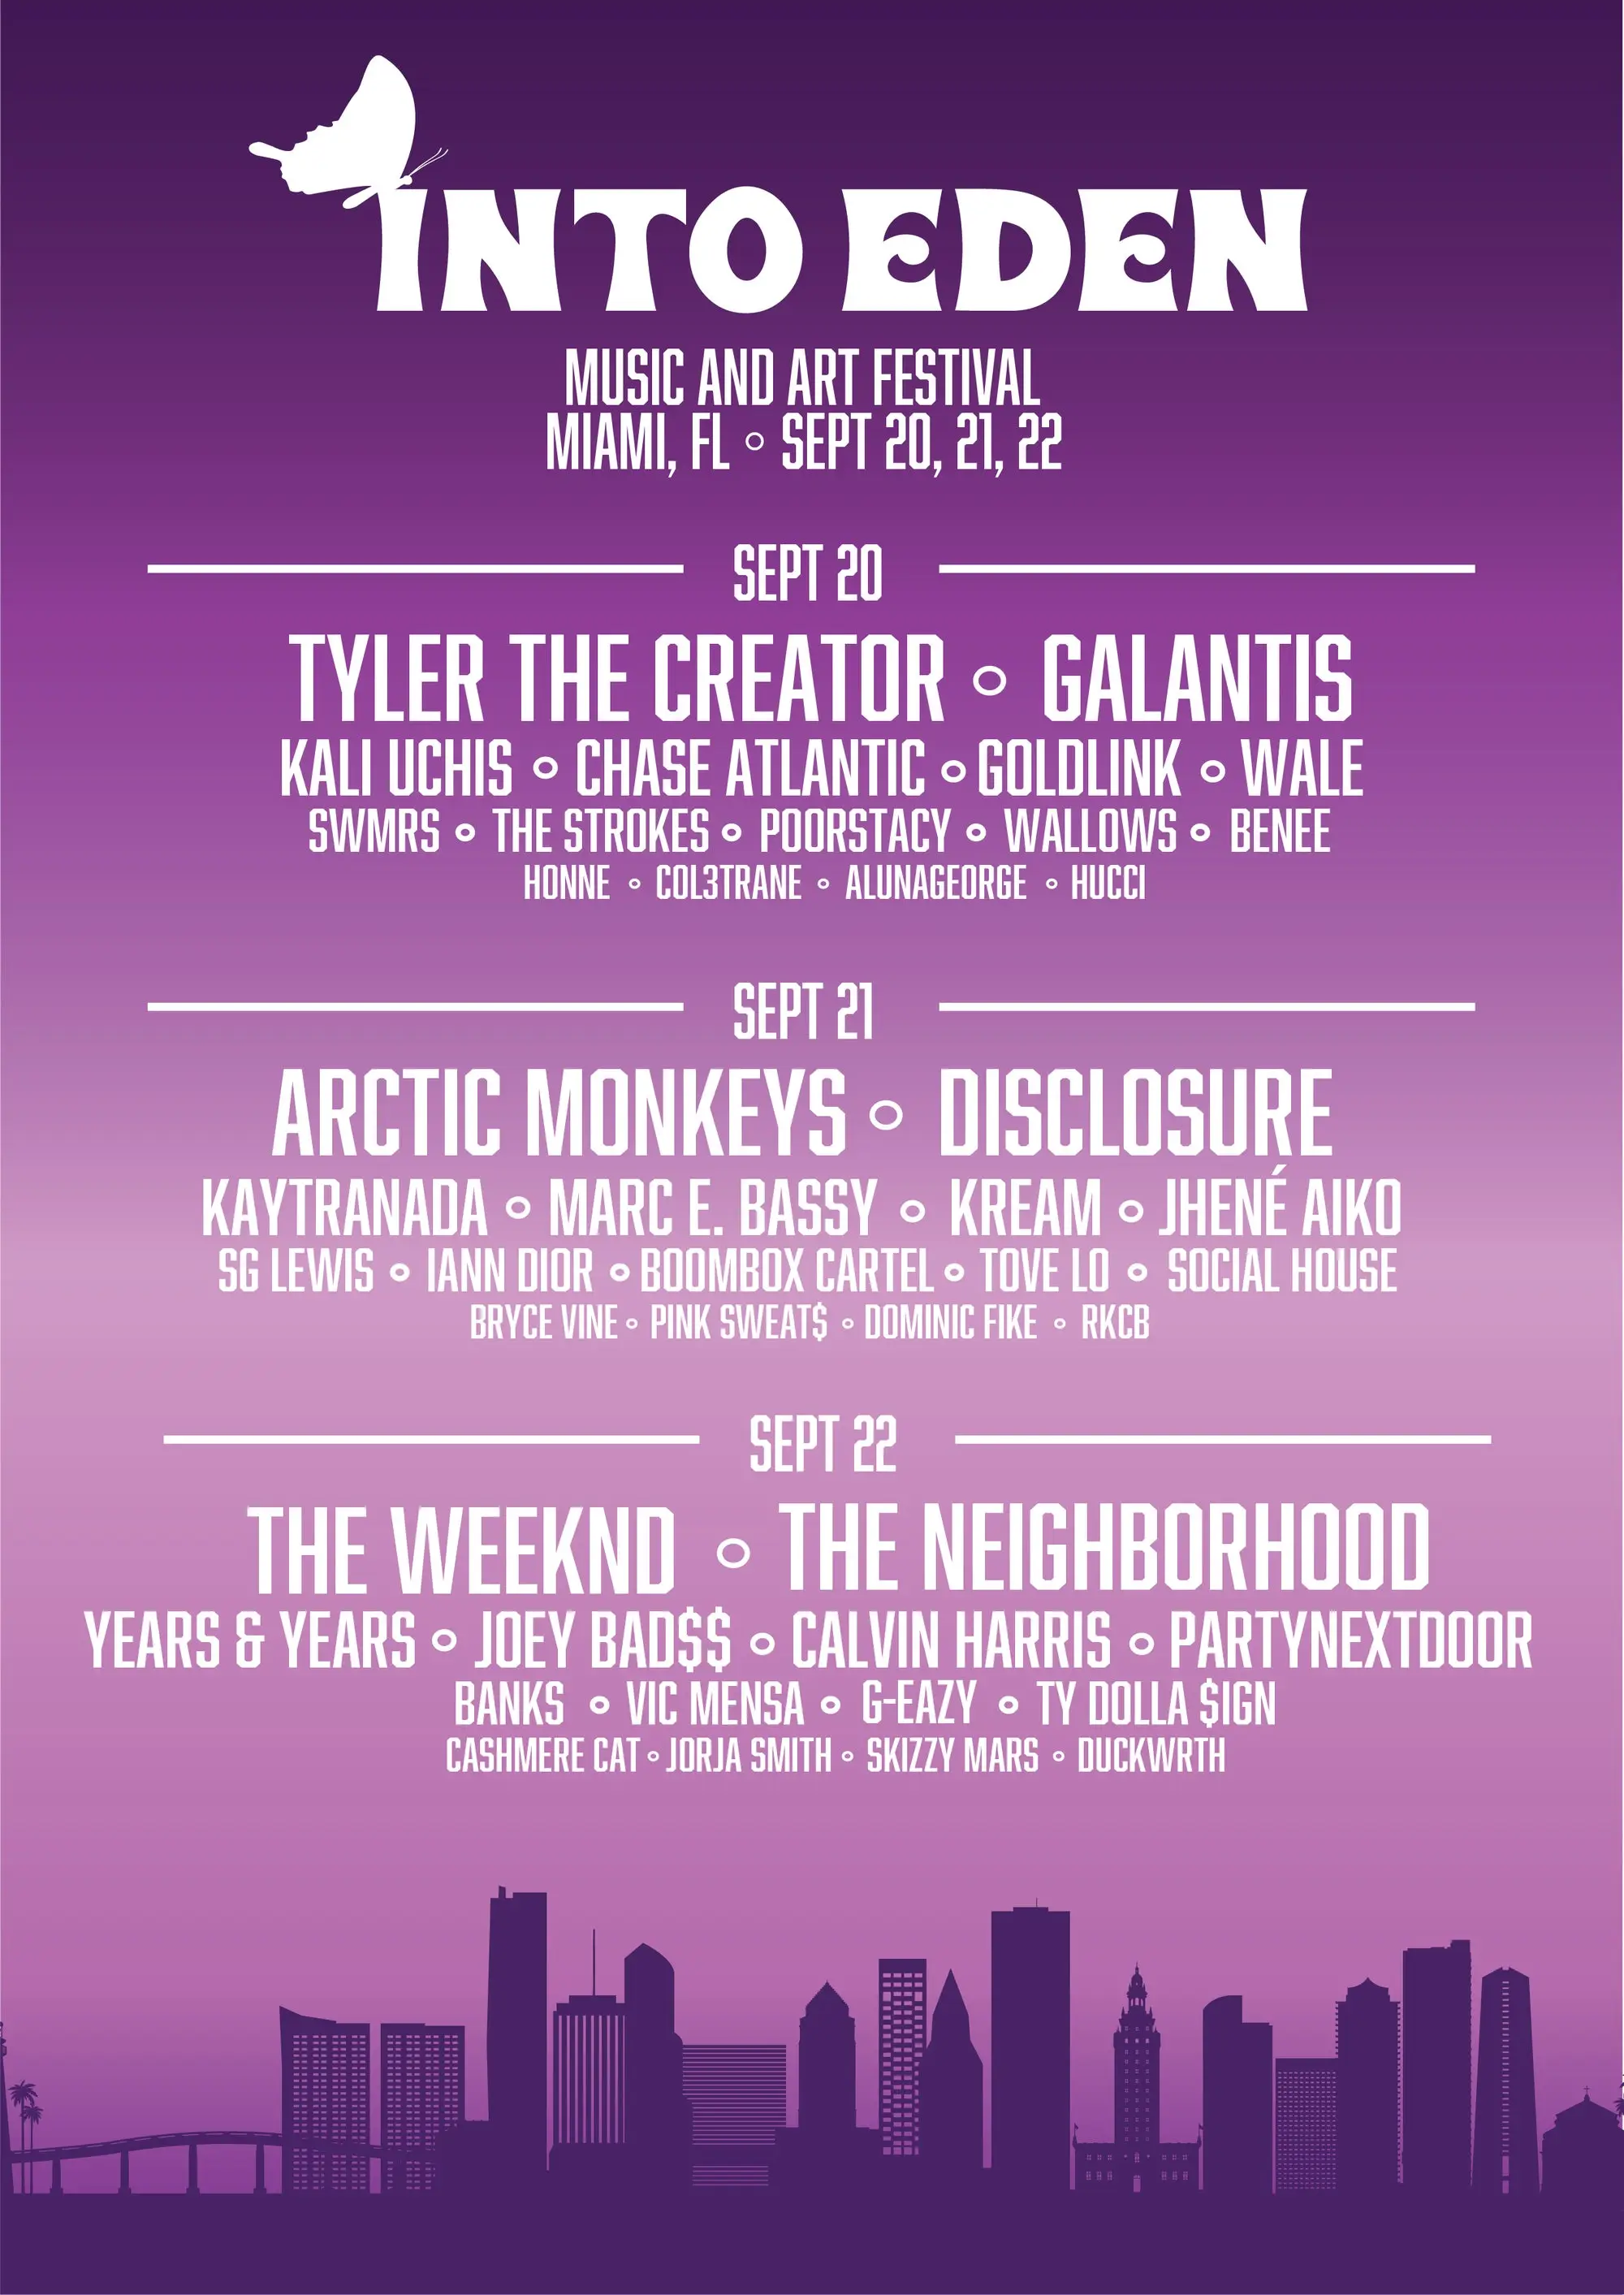 A concert lineup poster created using Adobe Photoshop, Adobe Illustrator and Adobe InDesign